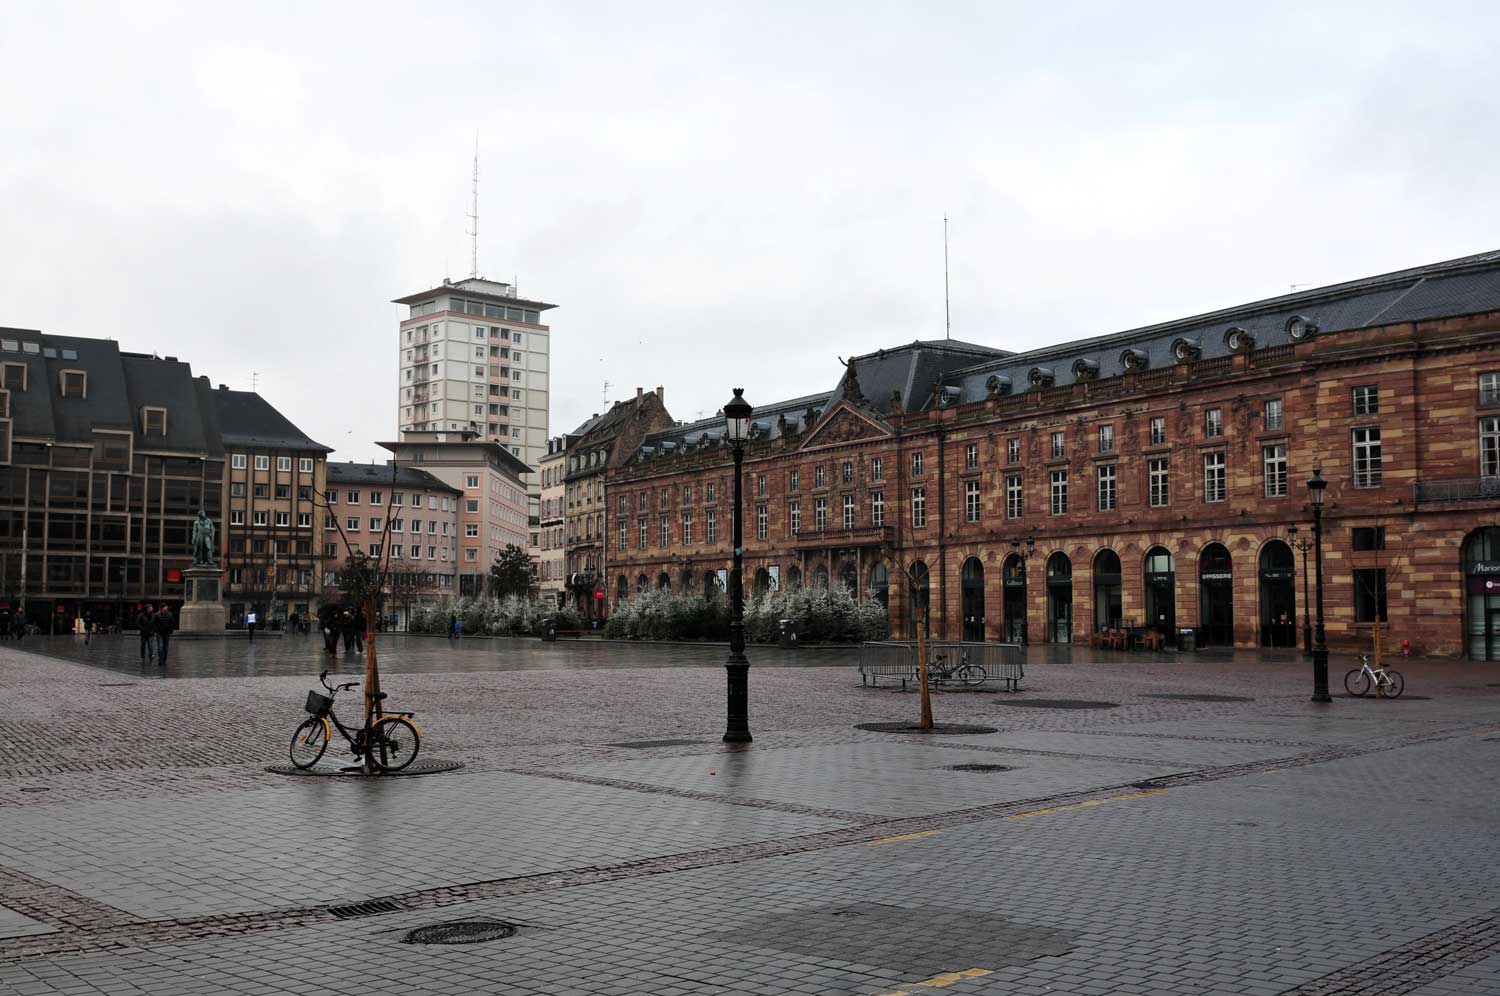 Kléber square and Sorg Tower